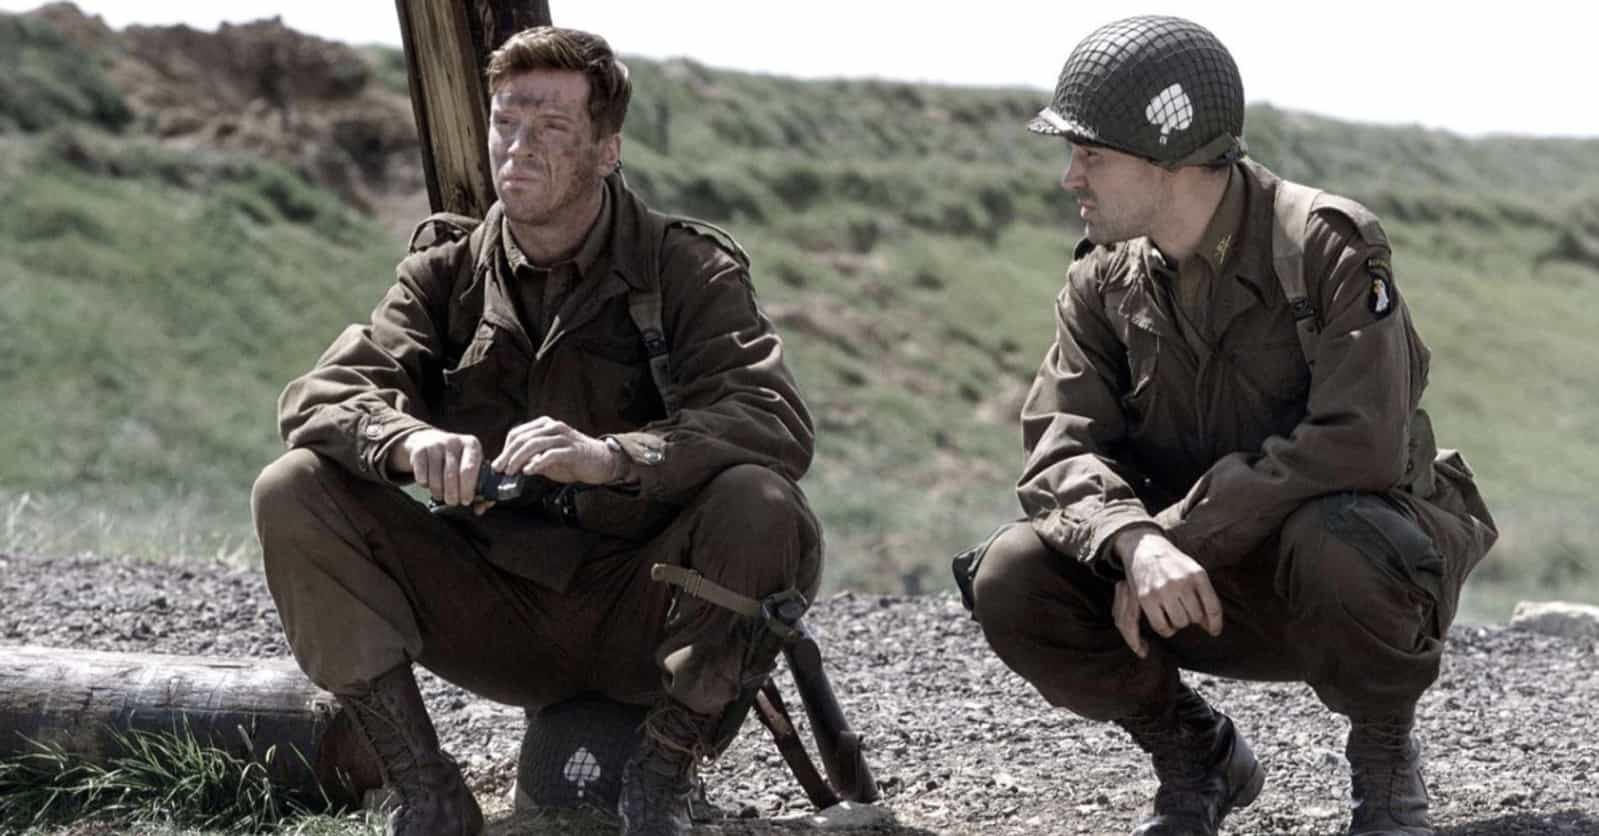 12 Behind The Scenes Stories From The Making Of 'Band Of Brothers'